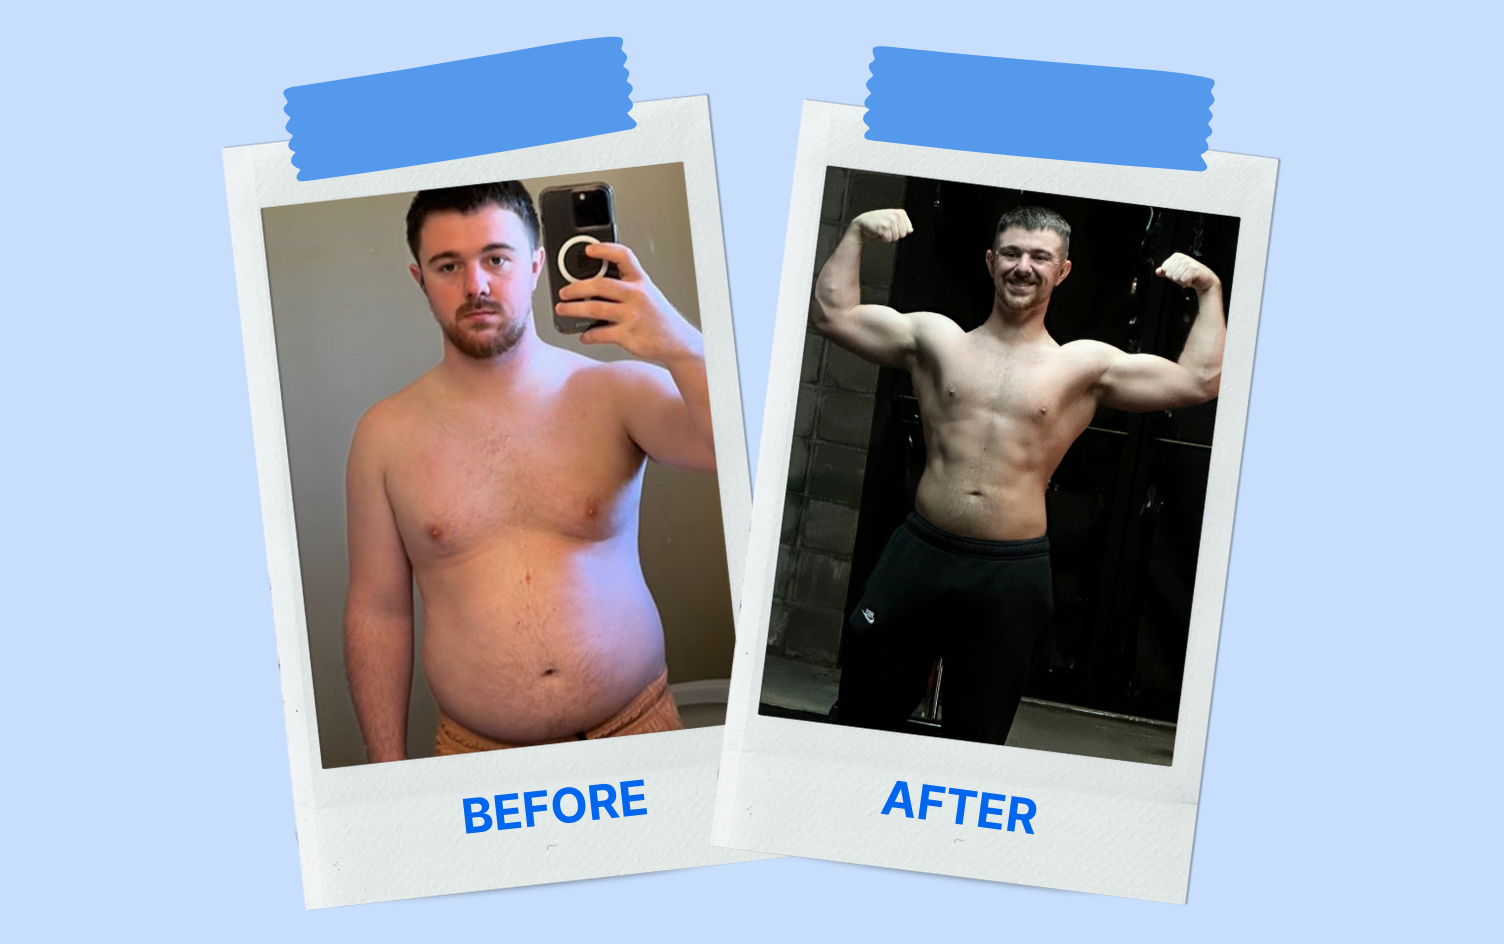 How Dillion Lost 40 Pounds in 100 Days [Video]